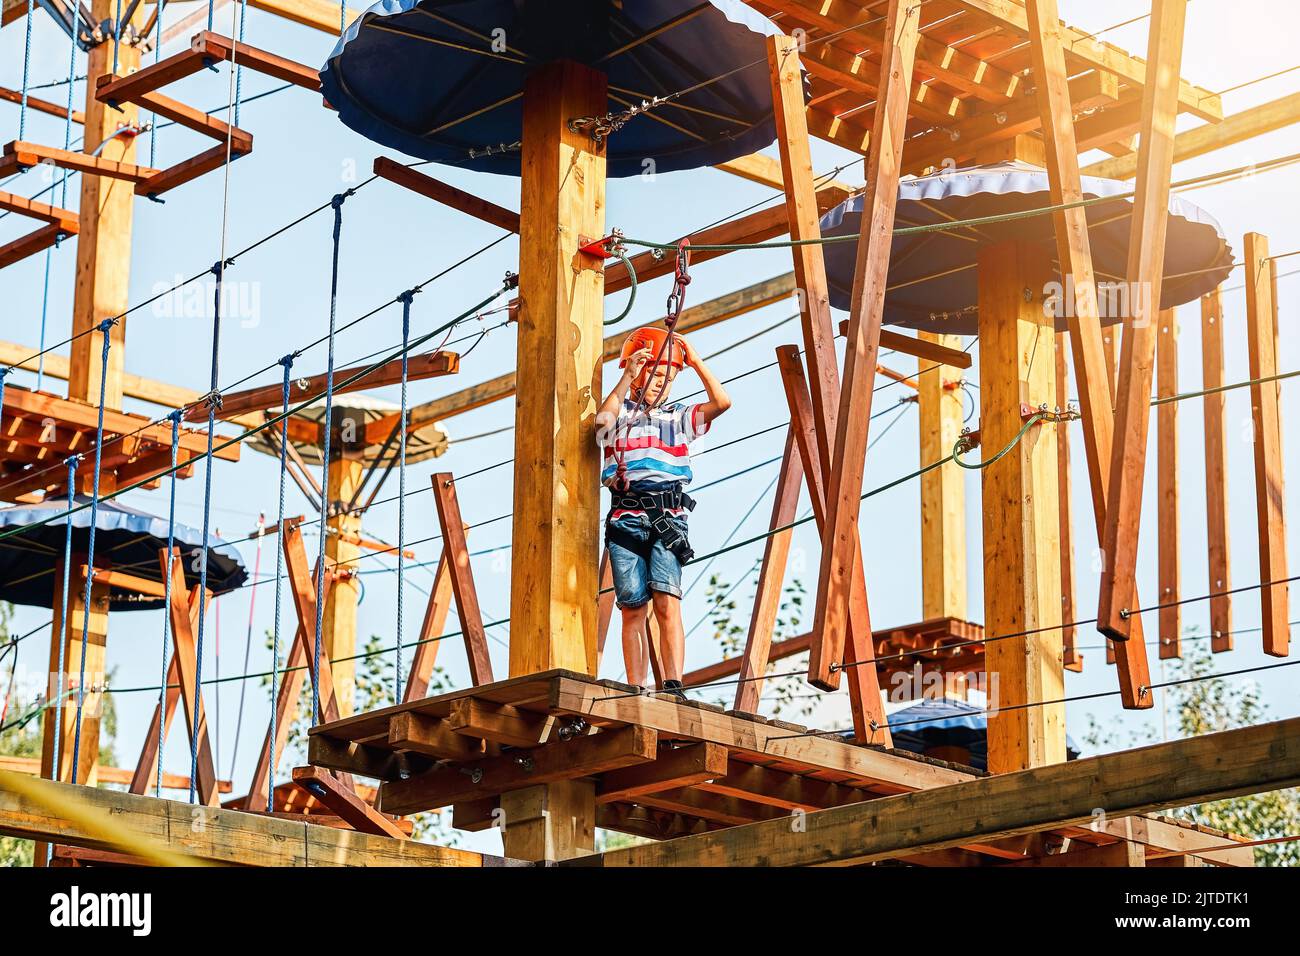 Boy in a helmet and climbing equipment standing on a wooden platform against the sky, spending time in rope park in summer evening Stock Photo